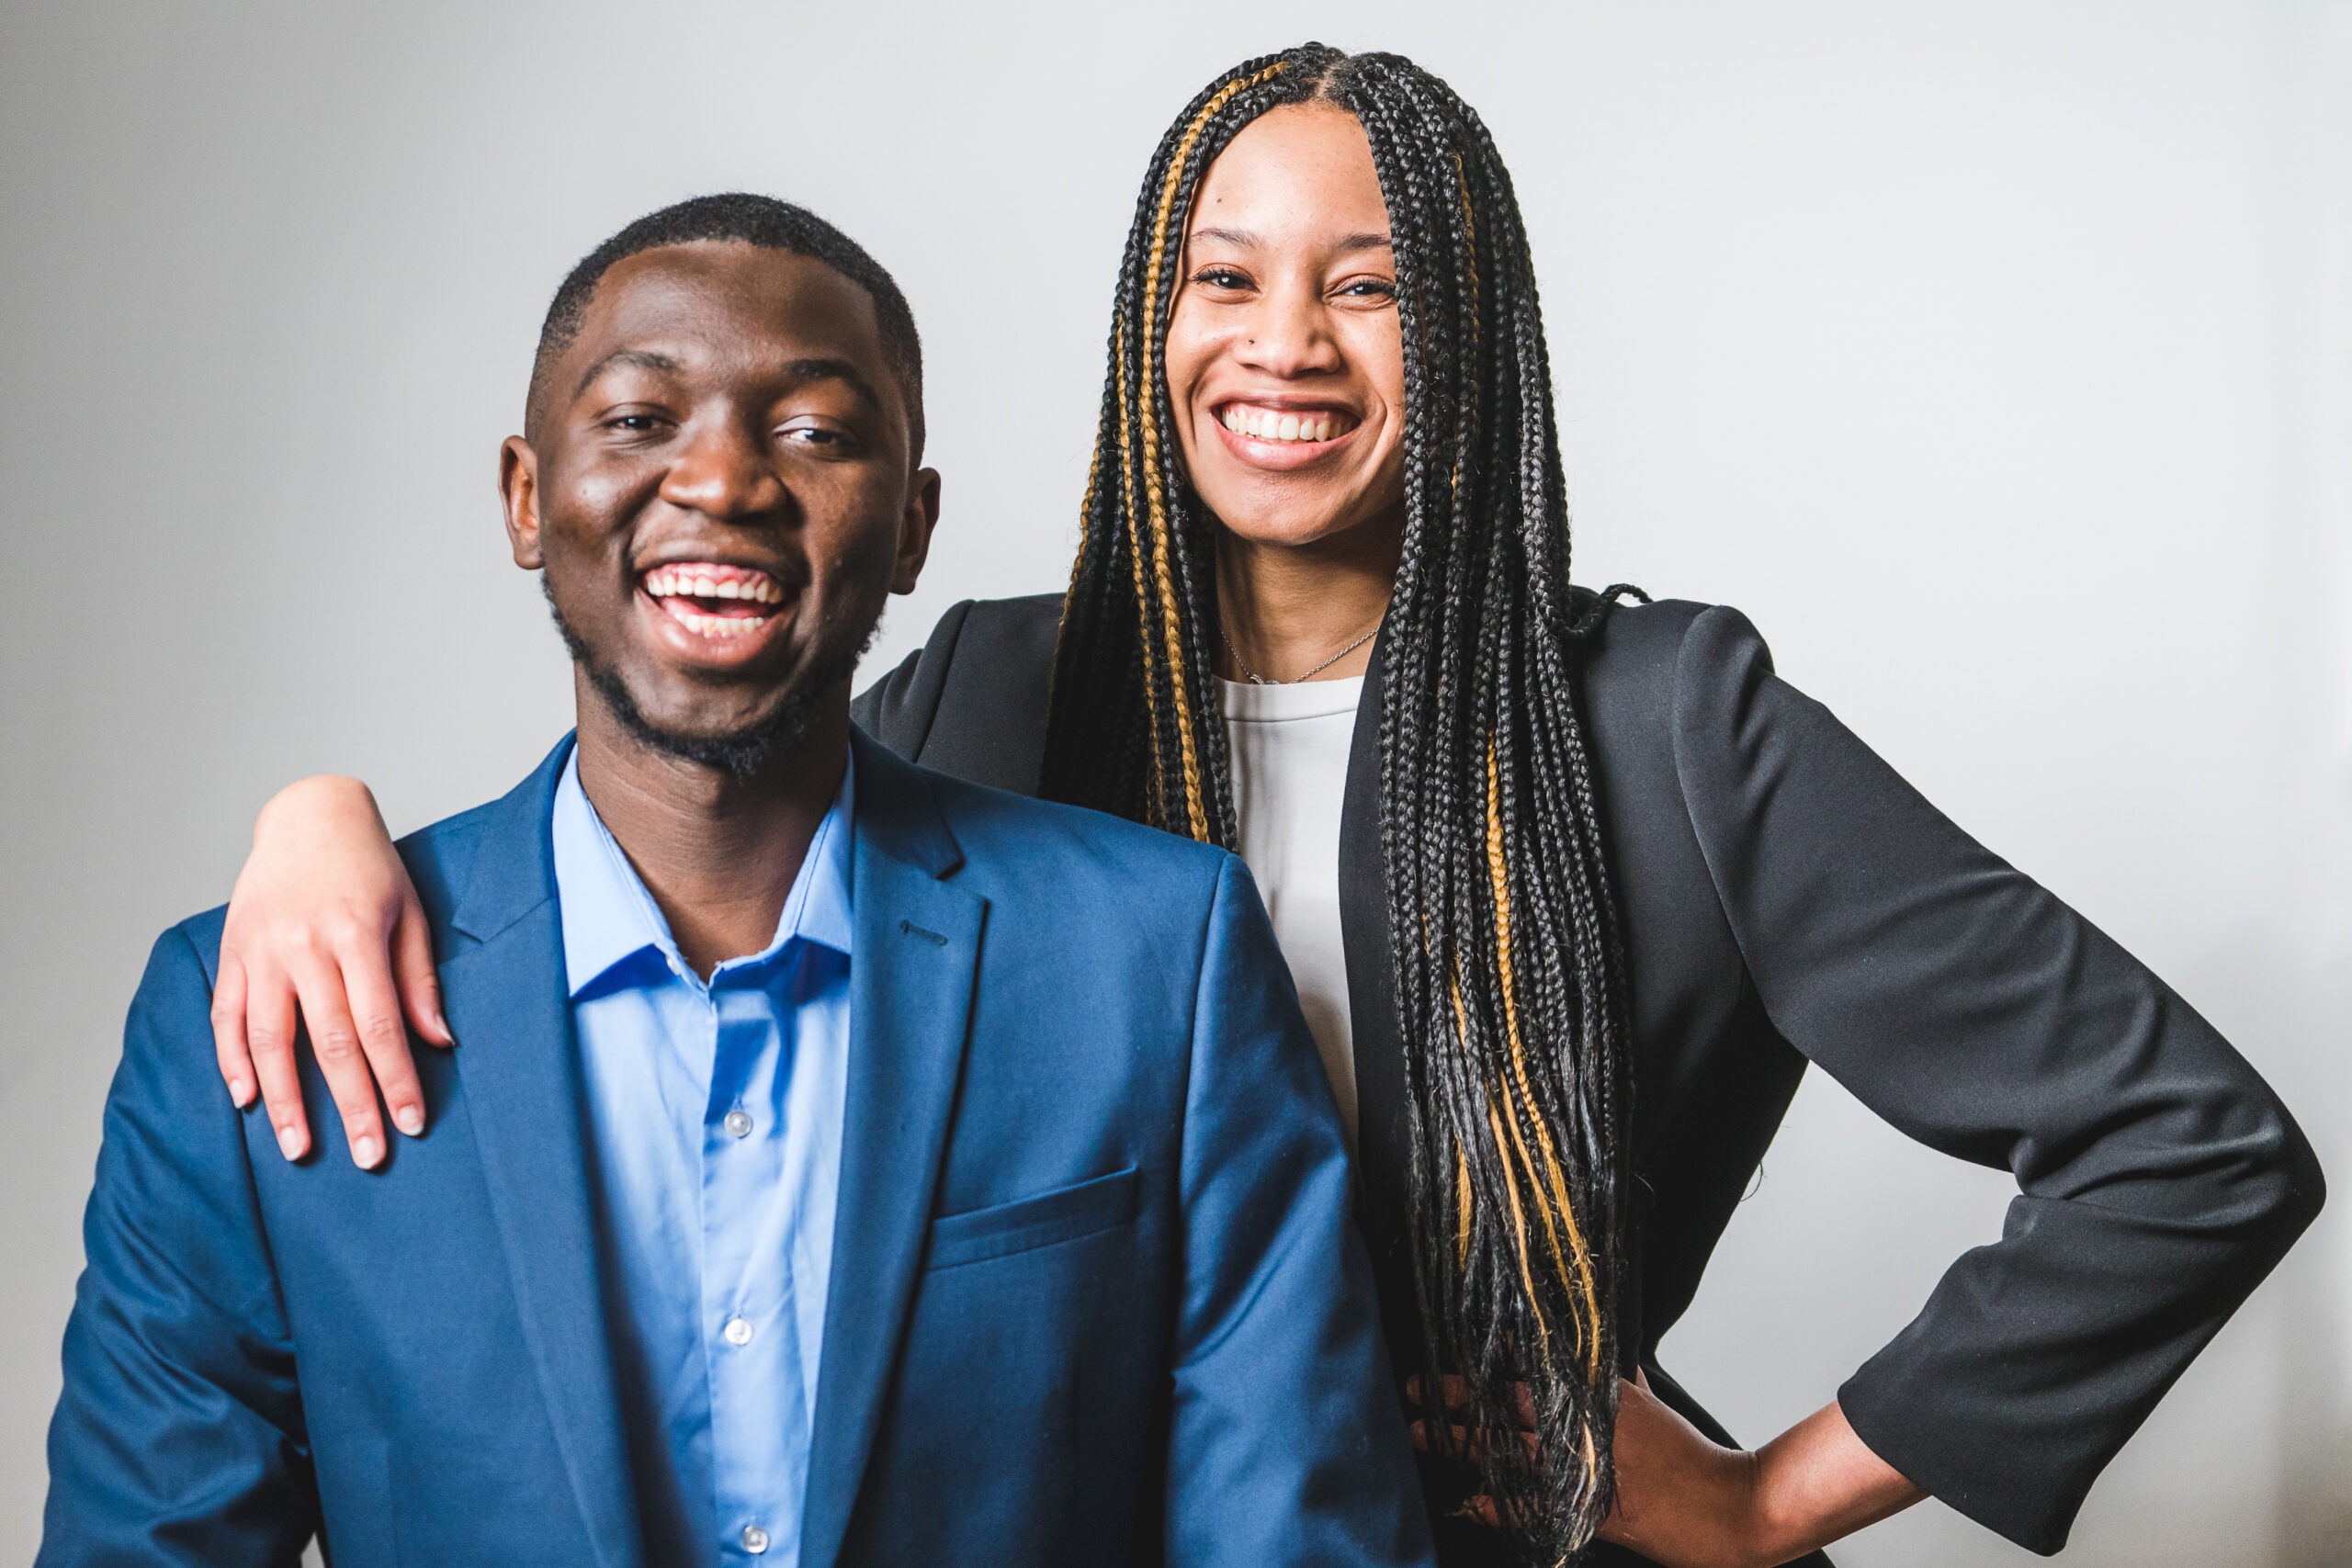 Friends Turned Co-Founders Launch Startup To Deliver Clean Energy Solutions To Africa — 'Think Of It As A Vending Machine For Battery Packs'